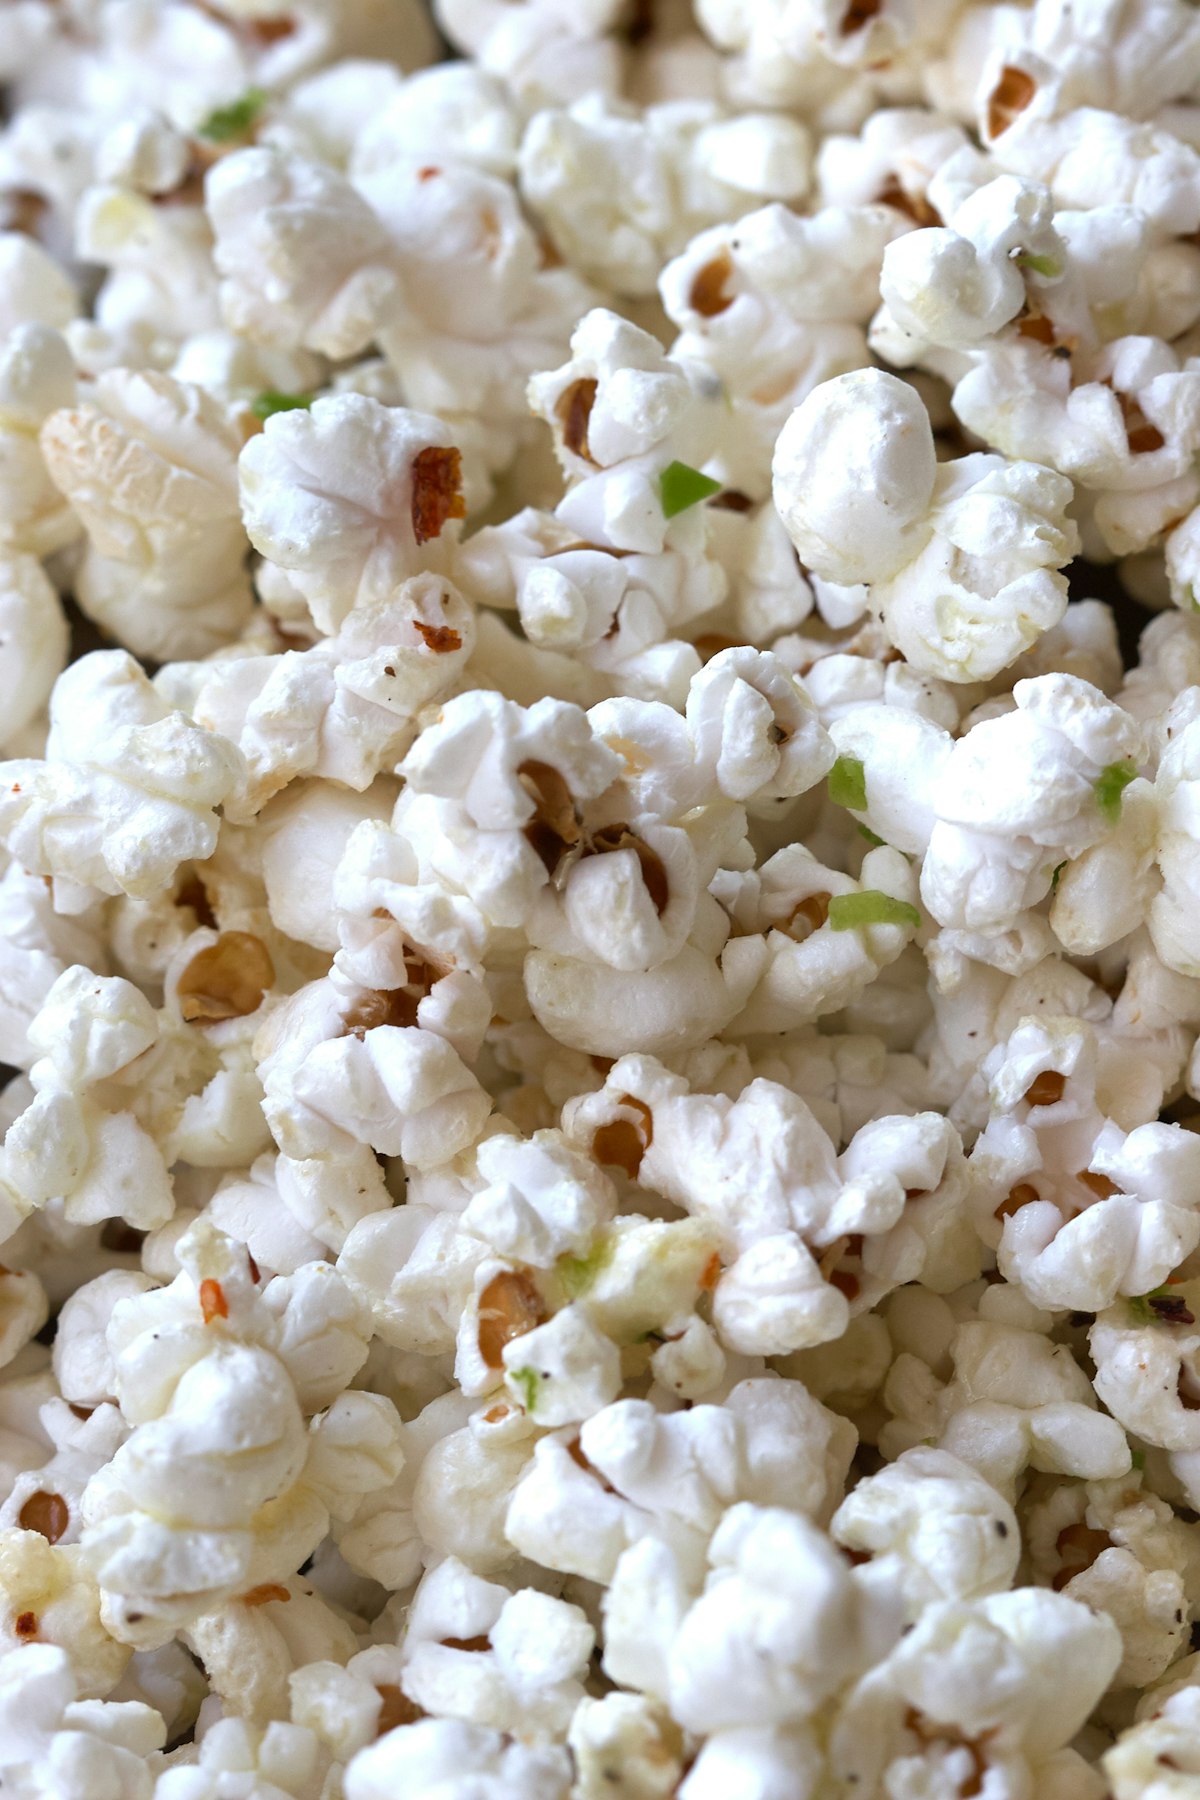 How To Cook Popcorn In A Pot On The Stove - TheCookful